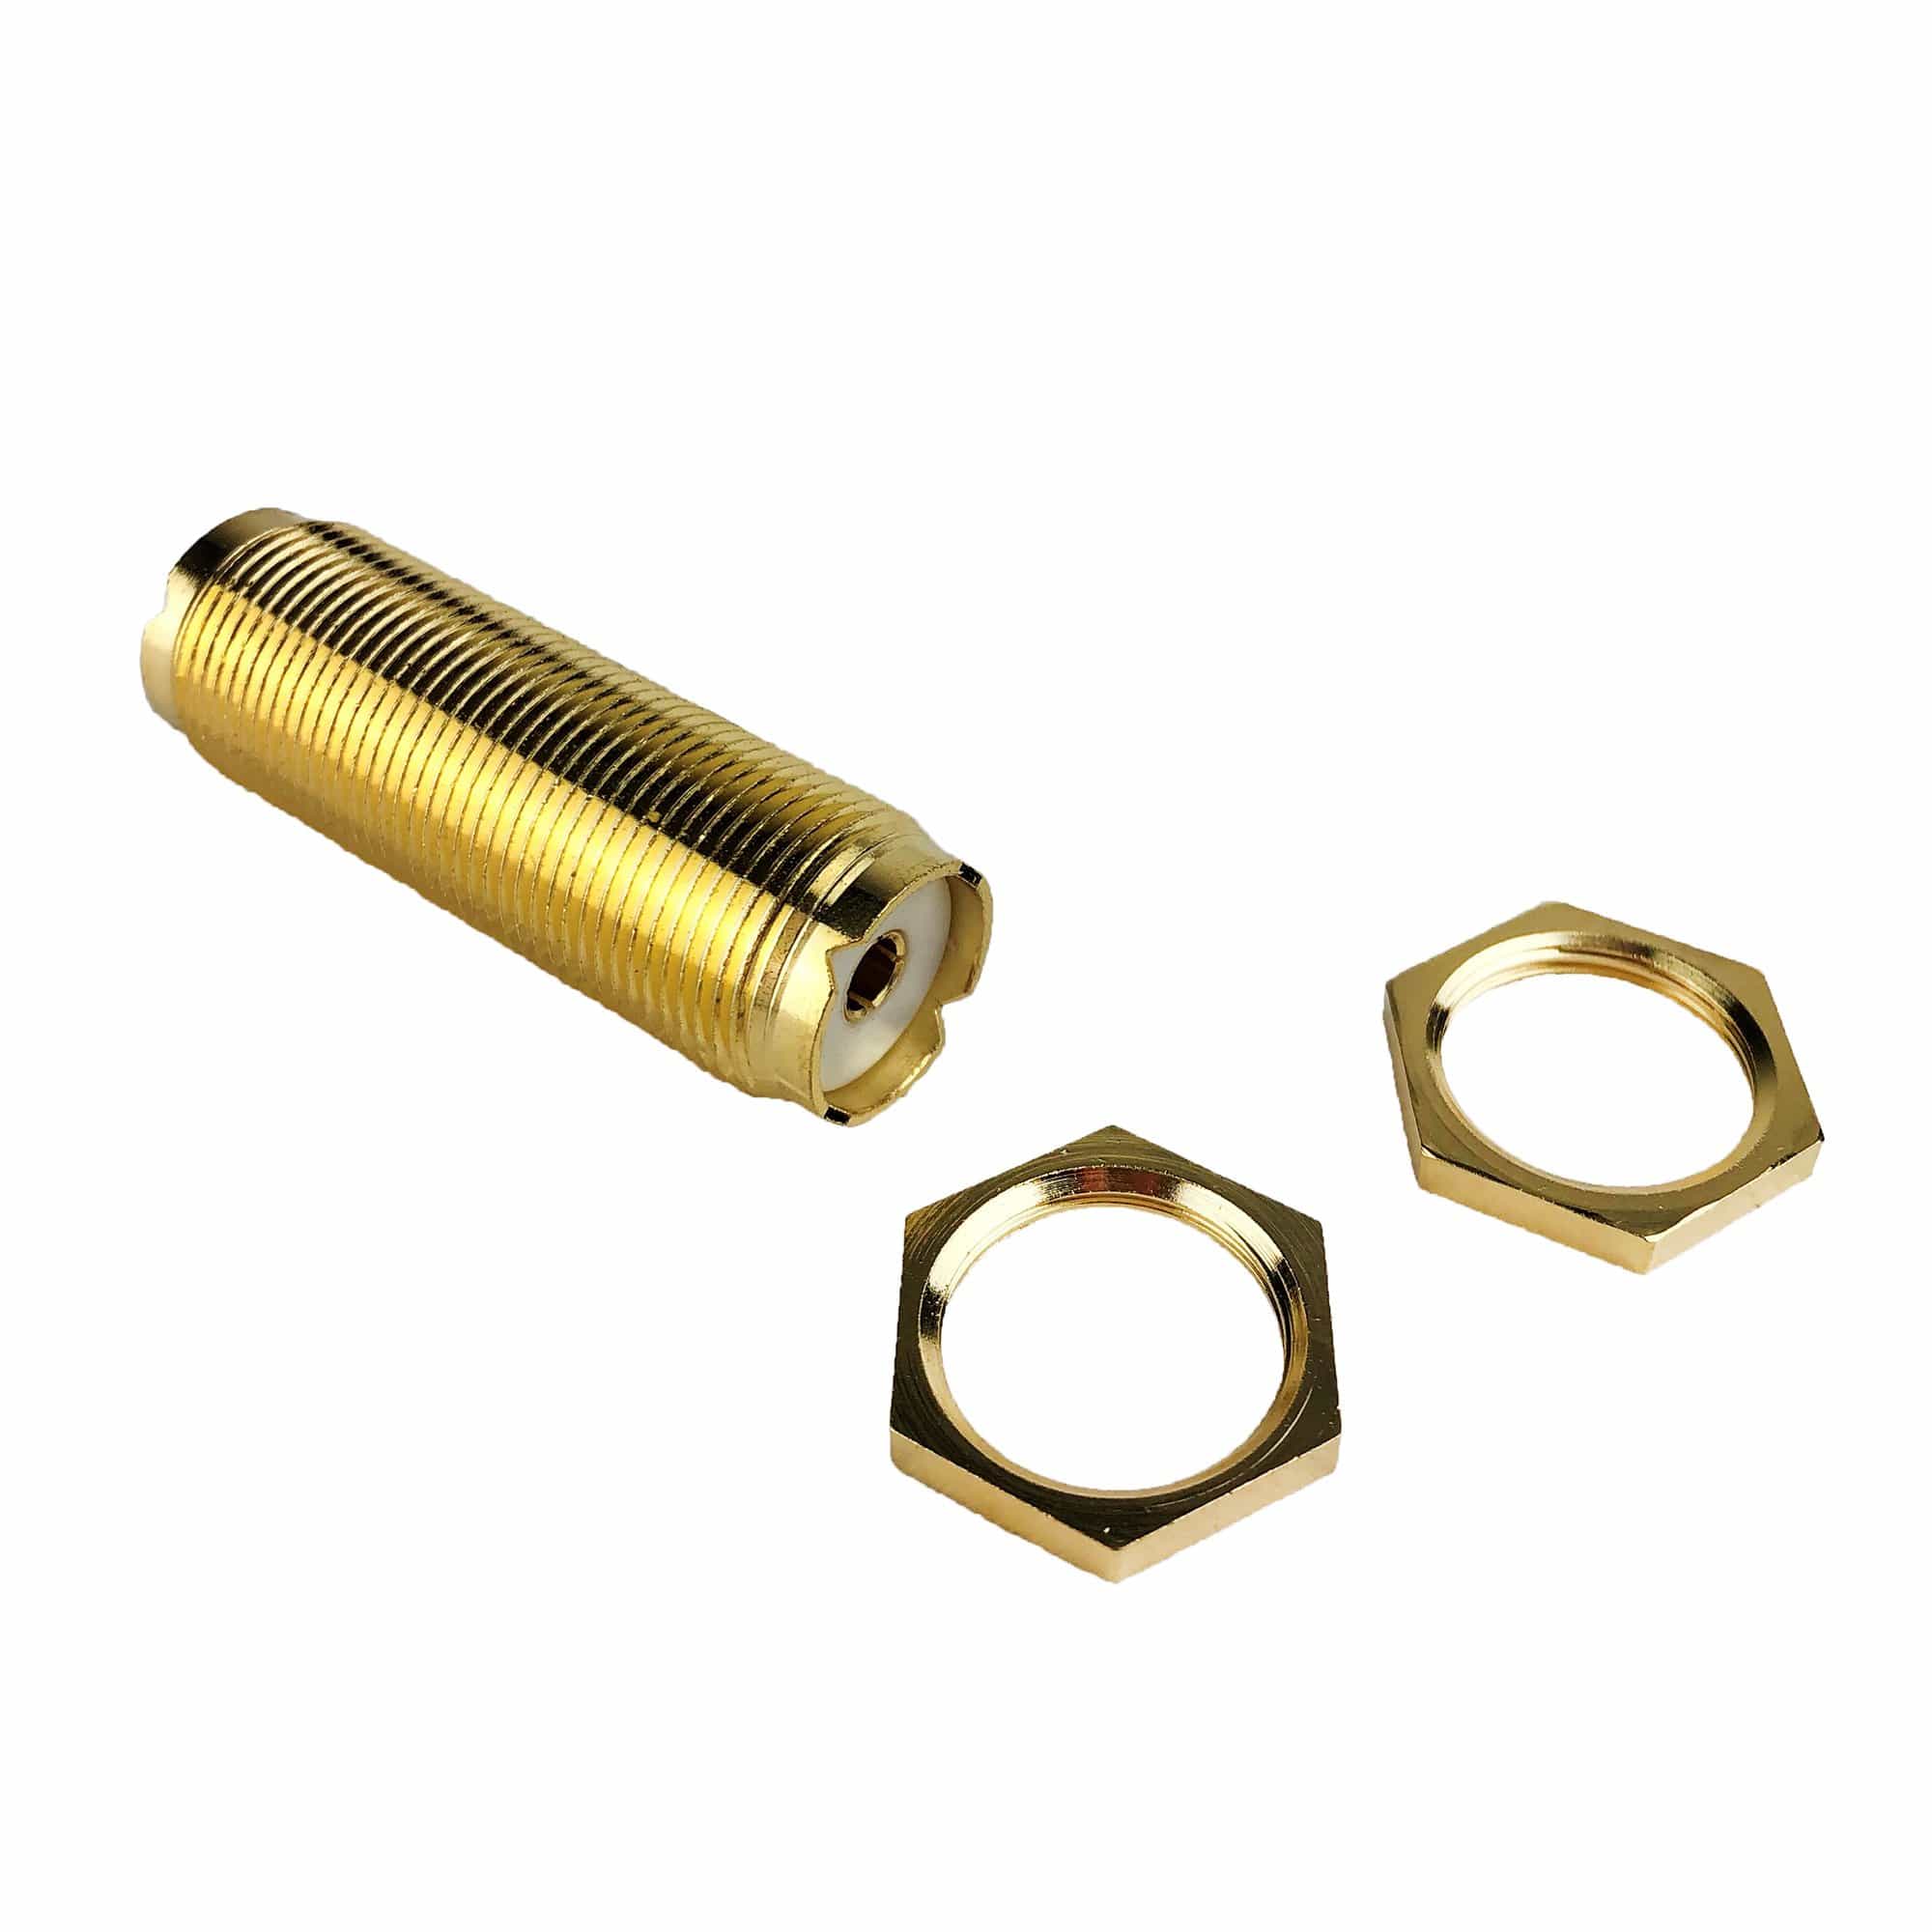 Shakespeare Pl-258-L-G Center Pin Pl Barrel Connector, Gold-Plated Bra